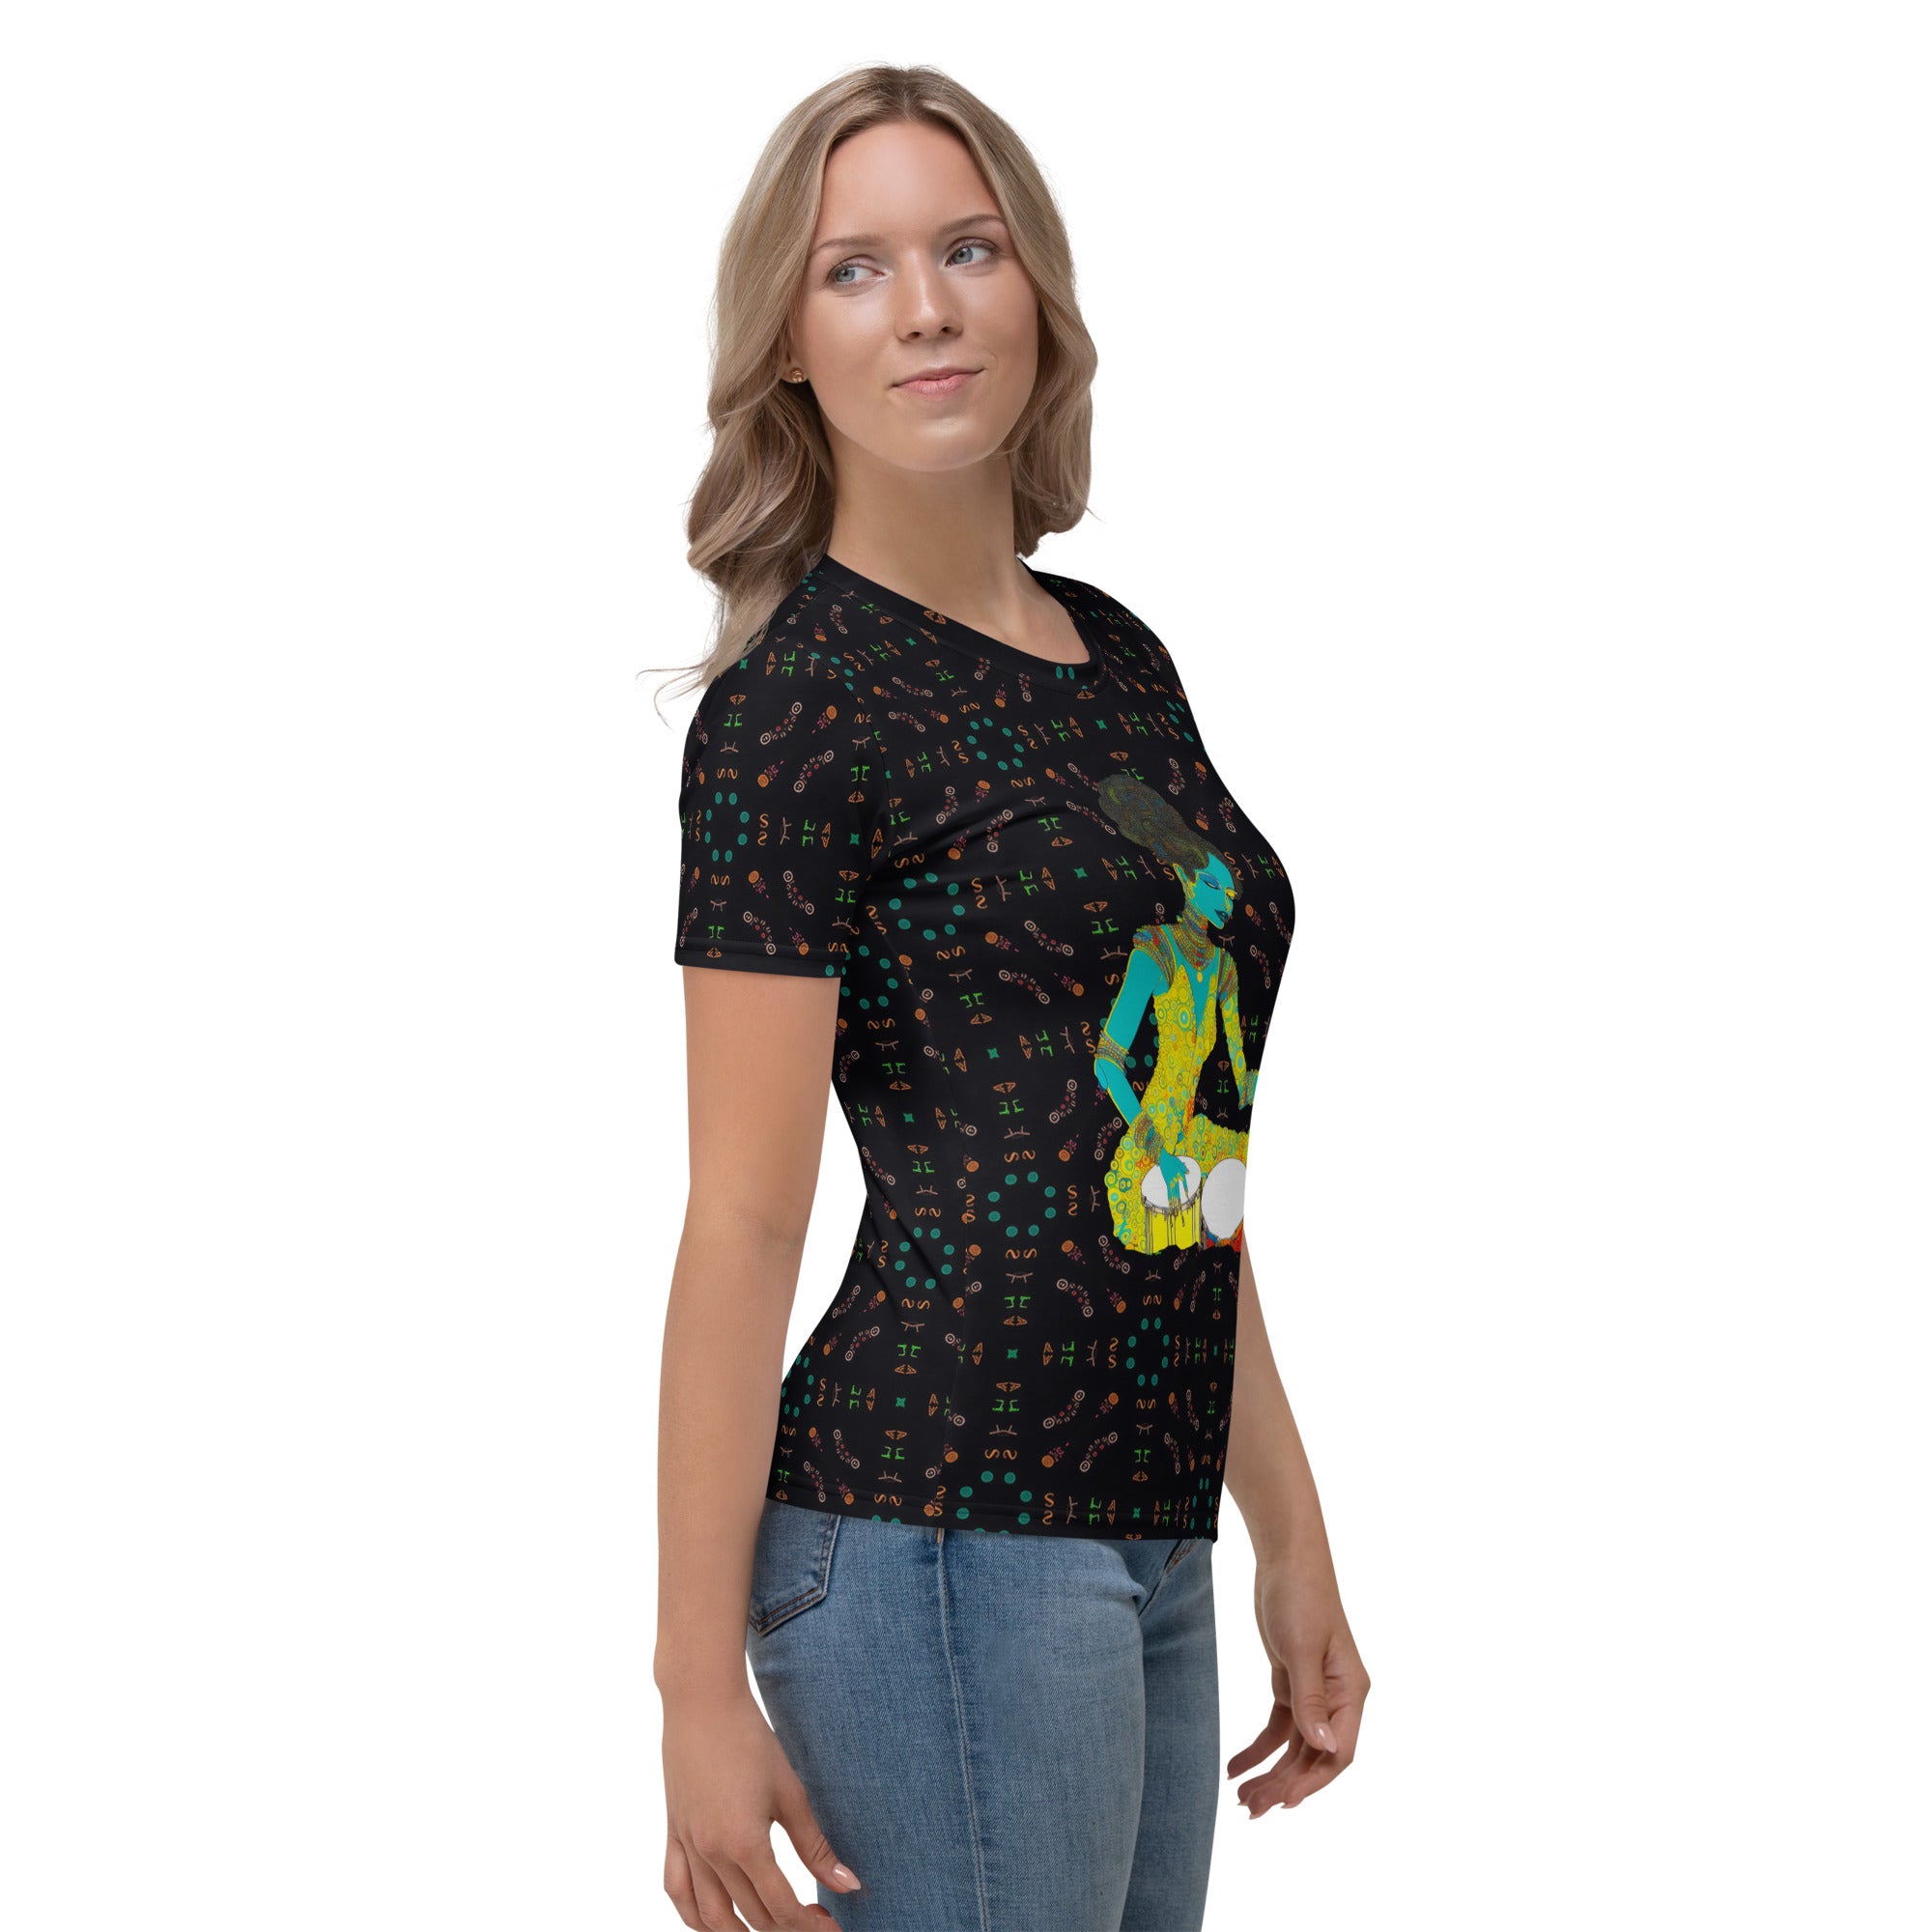 Botanical Peace Bliss Women's Crew Neck T-Shirt displayed on a clothing rack.